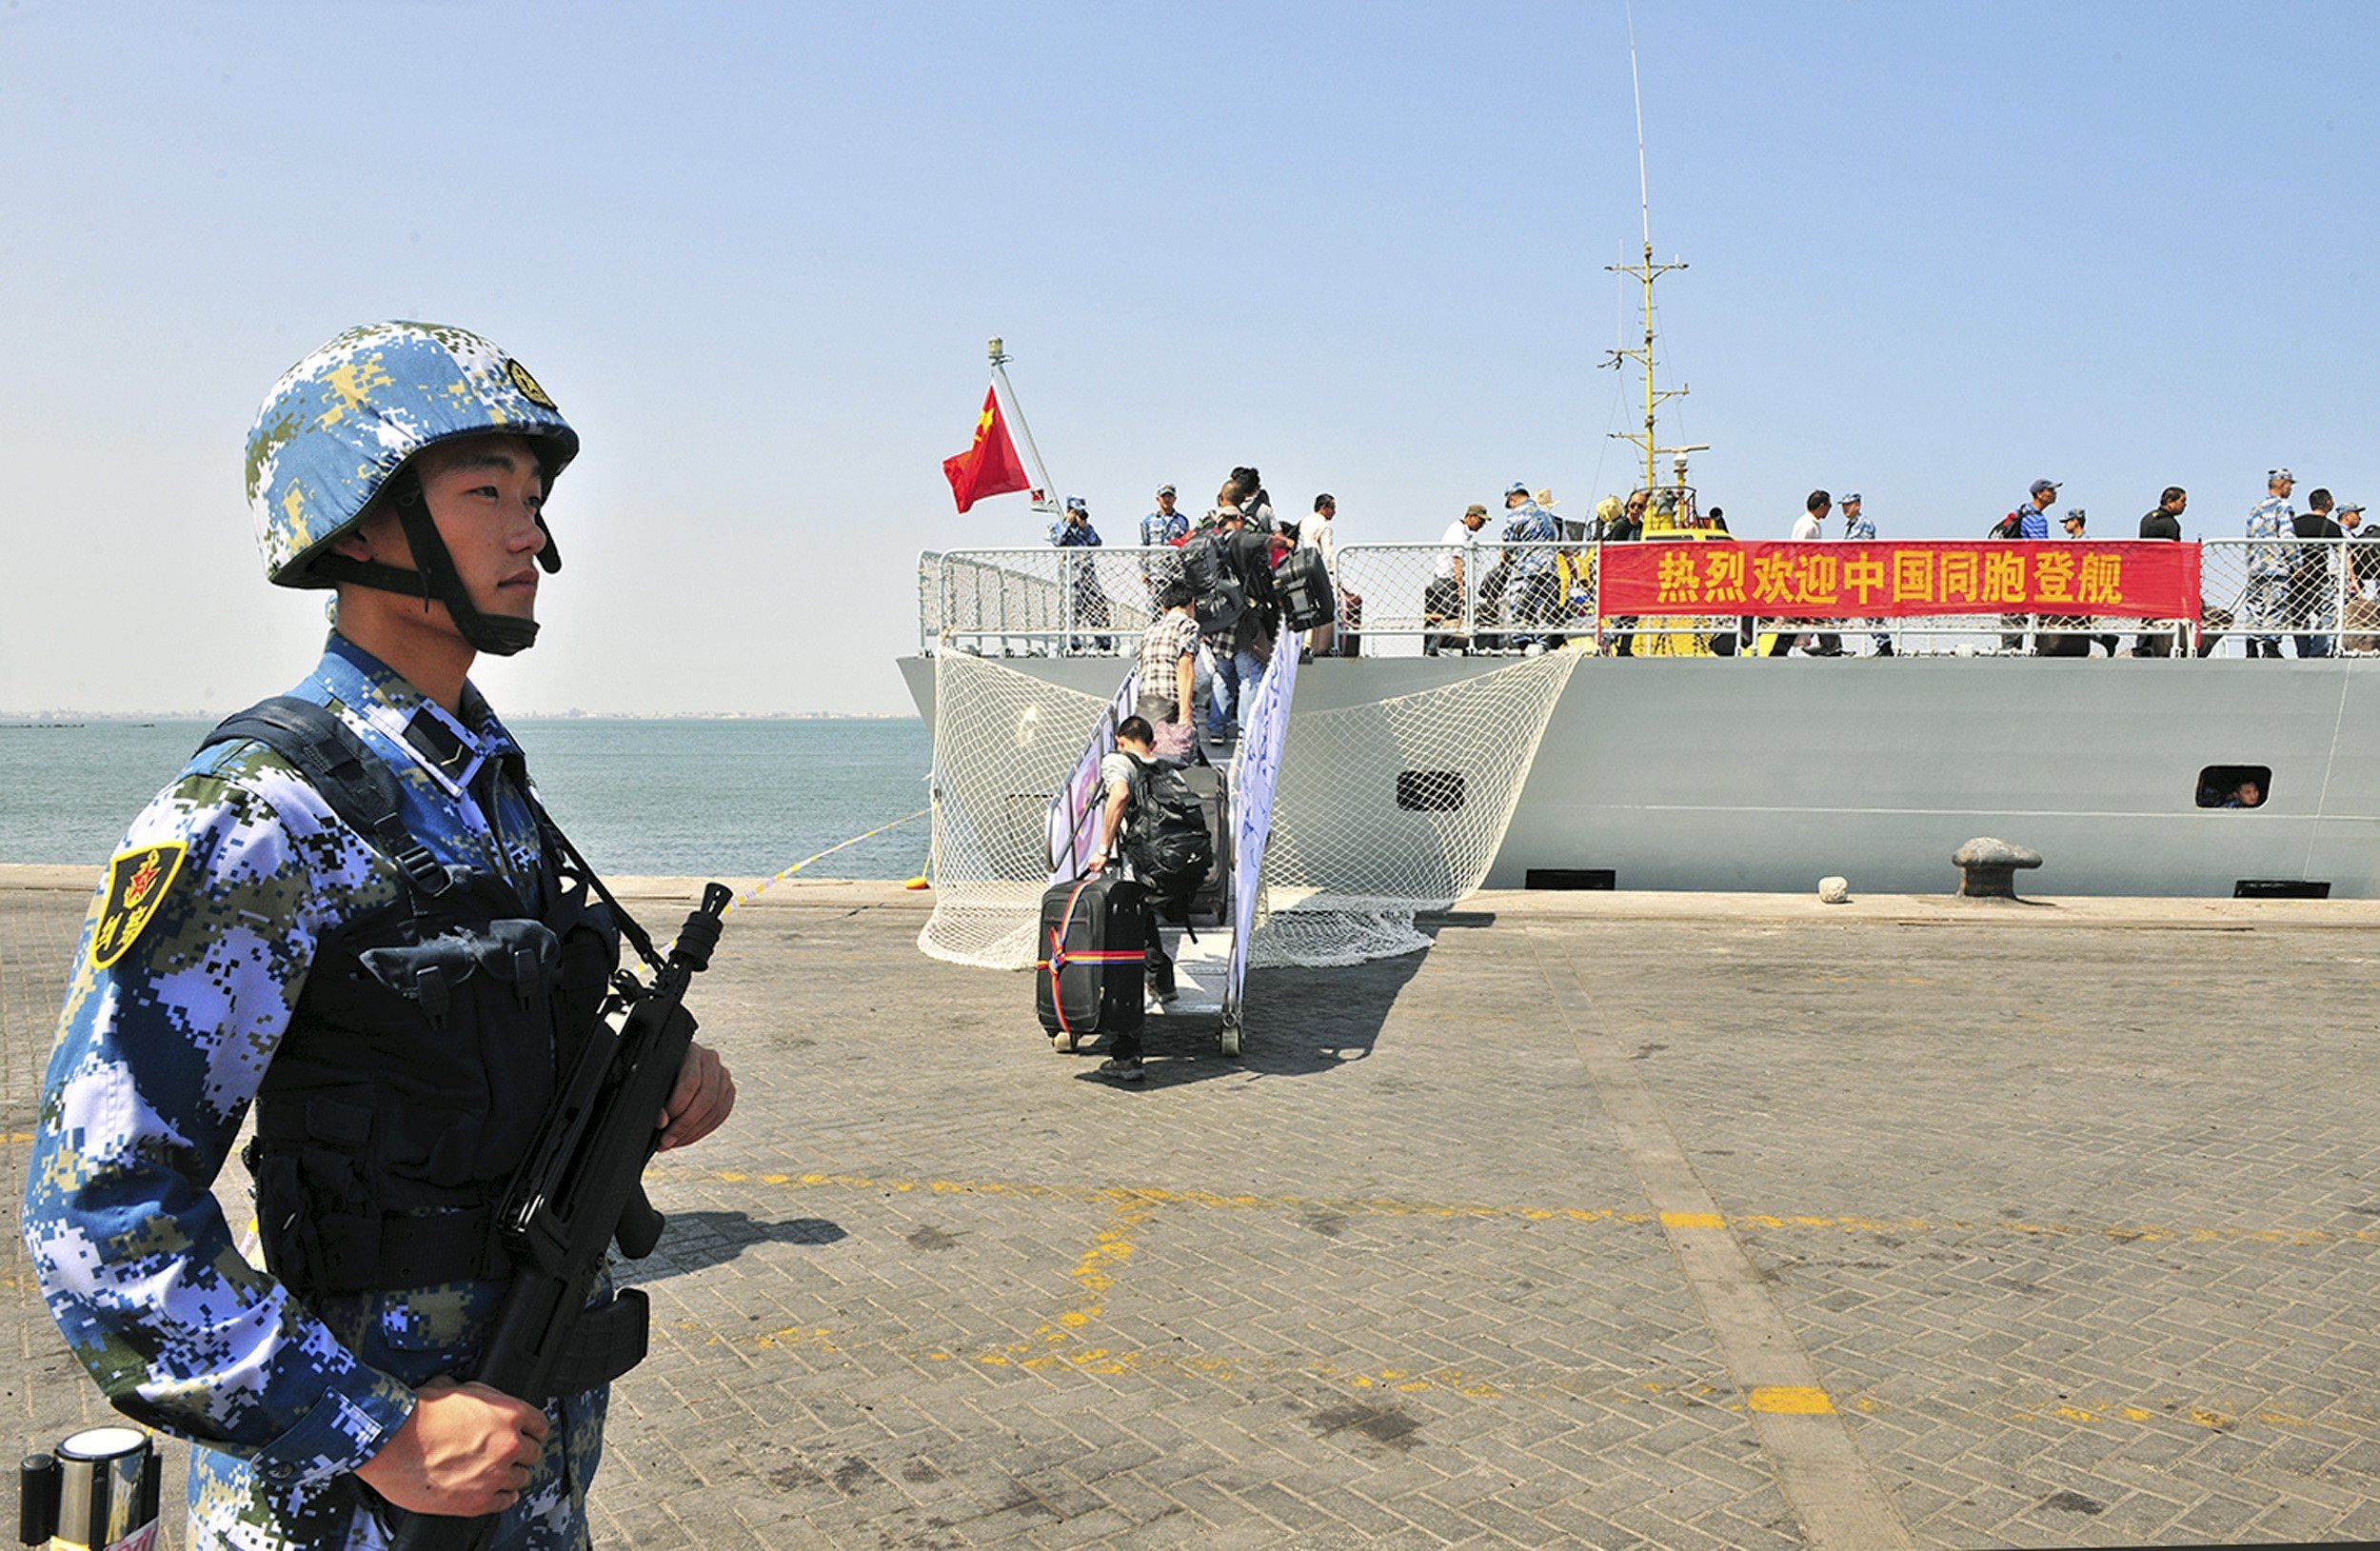 A soldier of the People’s Liberation Army stands guard as Chinese citizens board a navy ship in Aden in 2015. Photo: Reuters